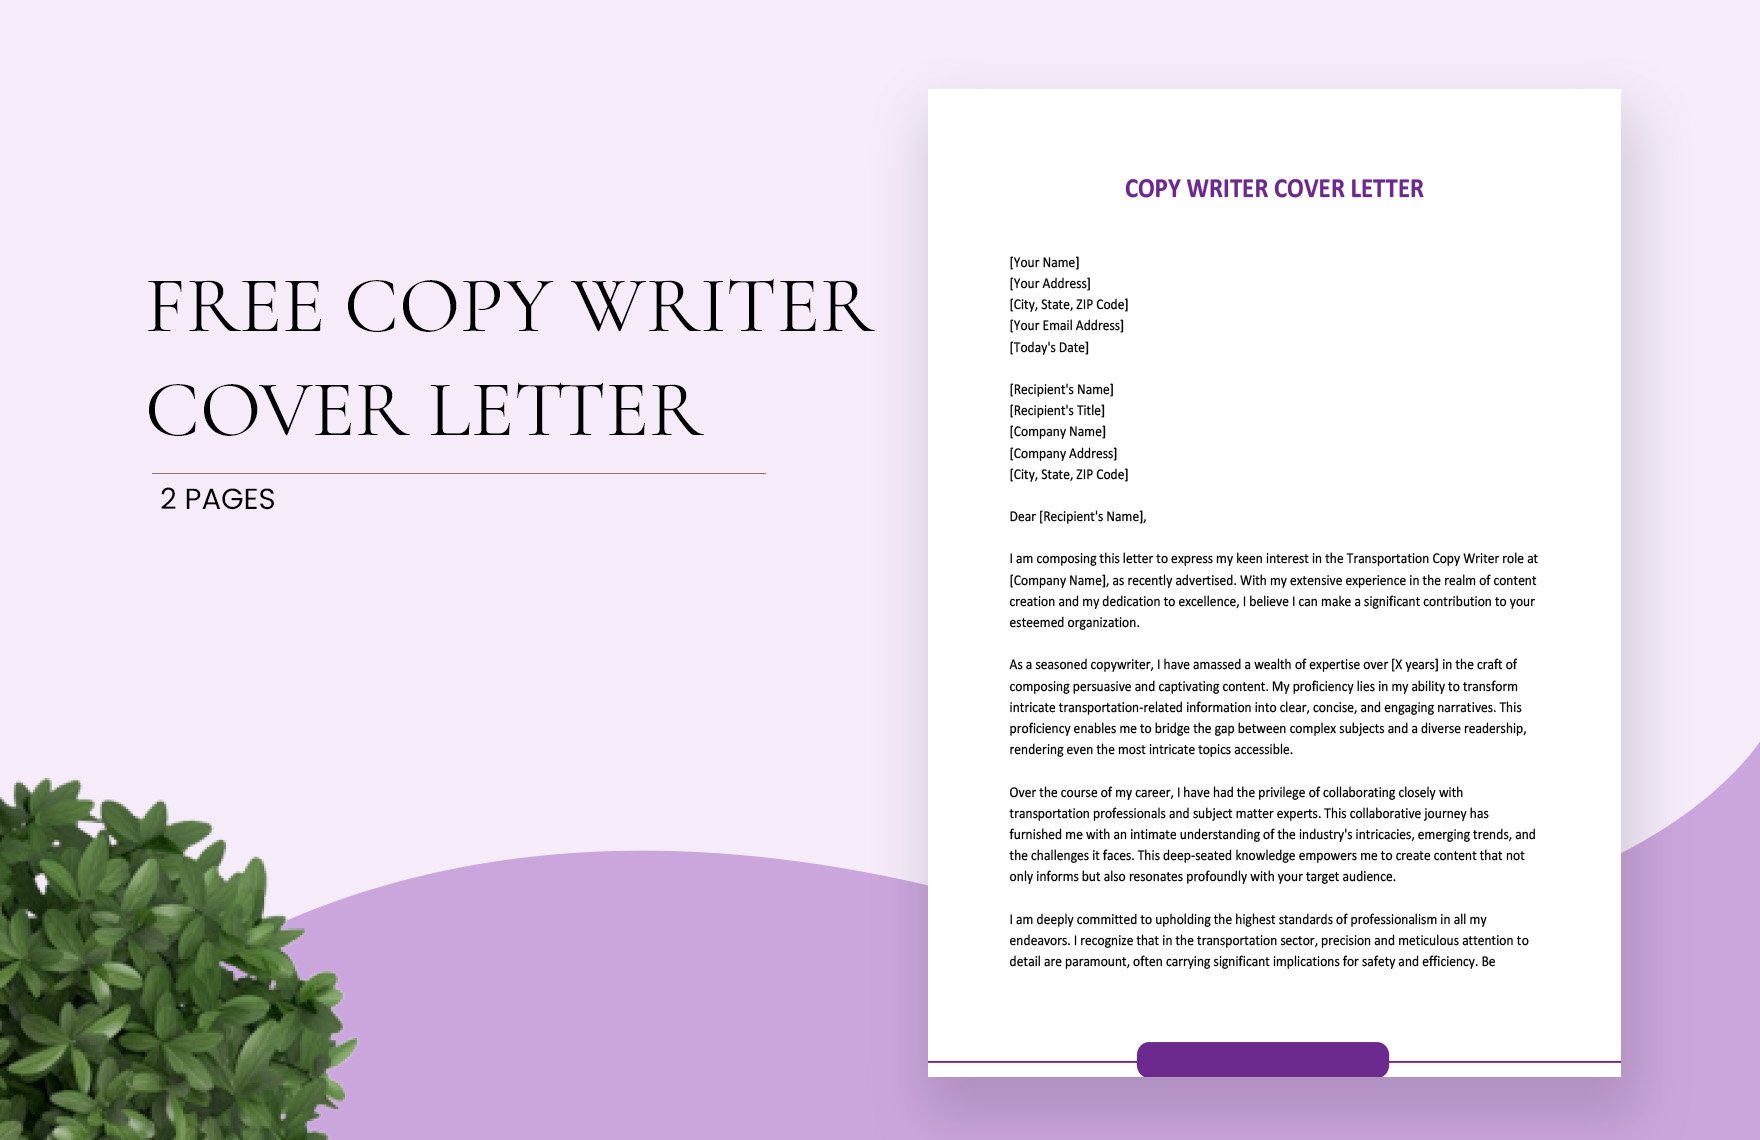 Copy Writer Cover Letter in Word, Google Docs